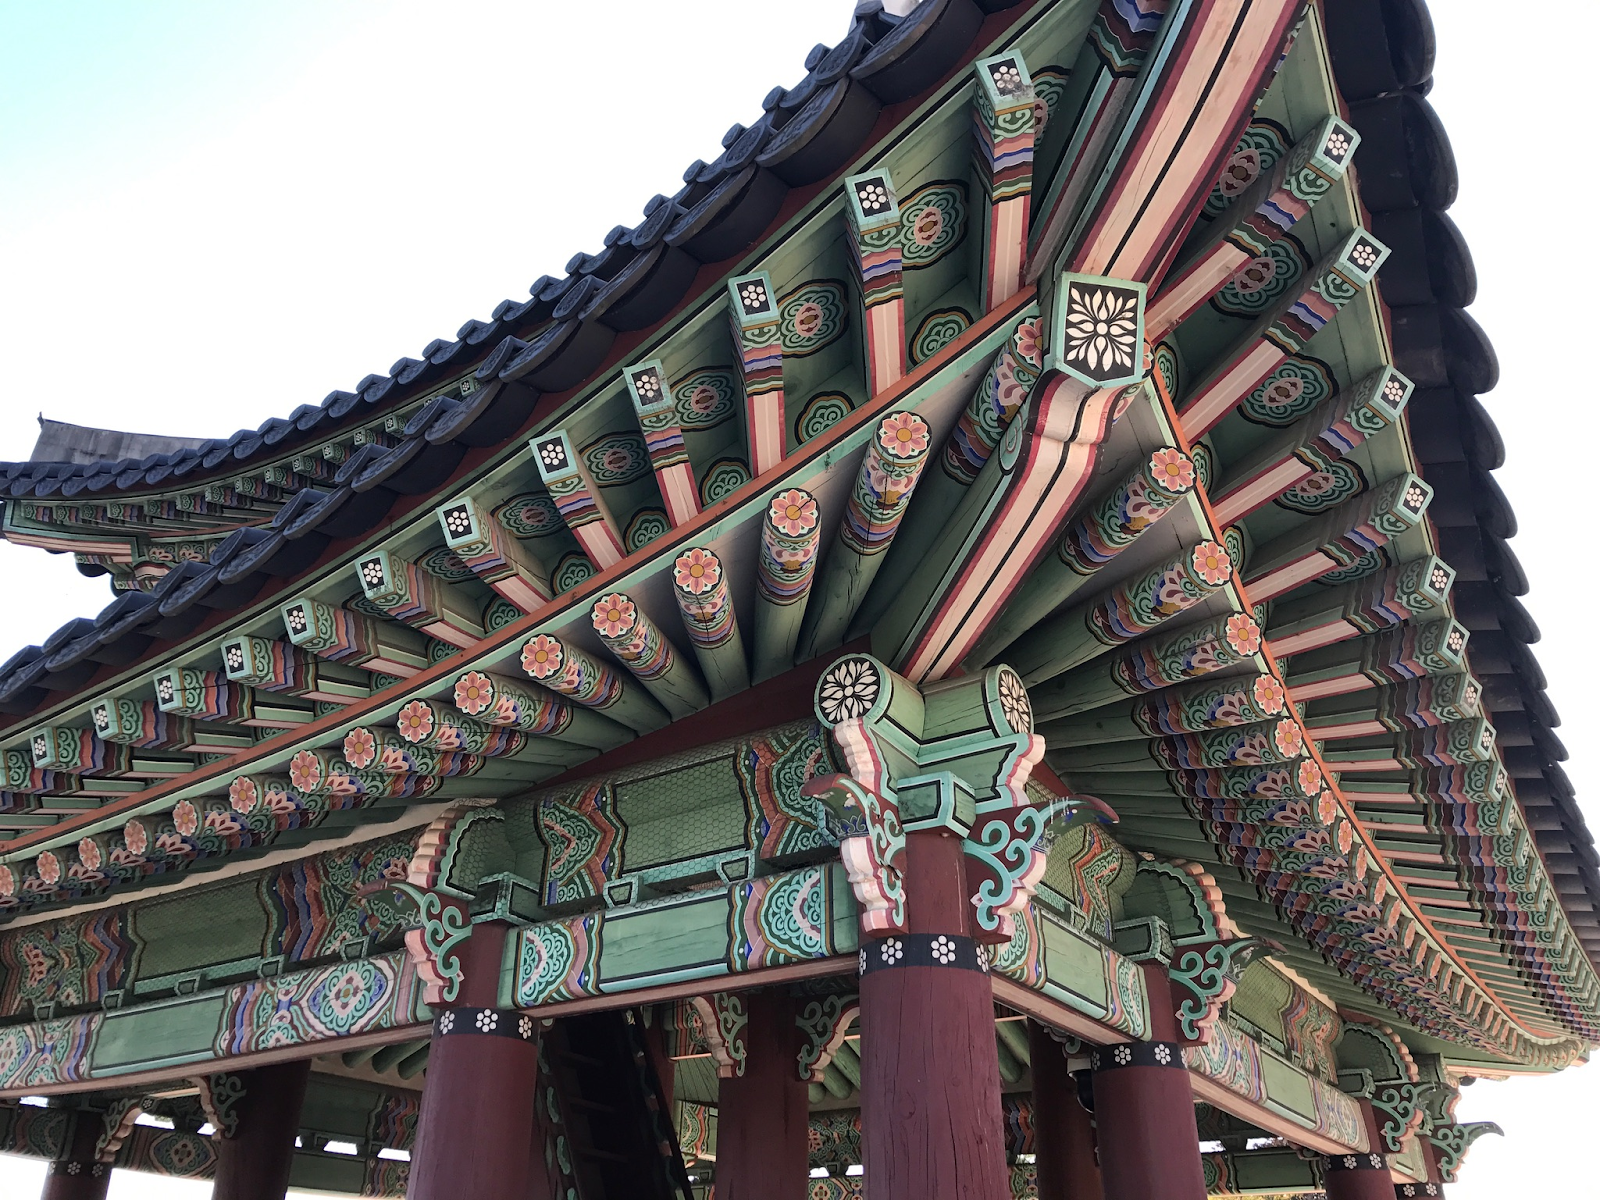 An incredible close-up photograph of Korea's historical architecture style.